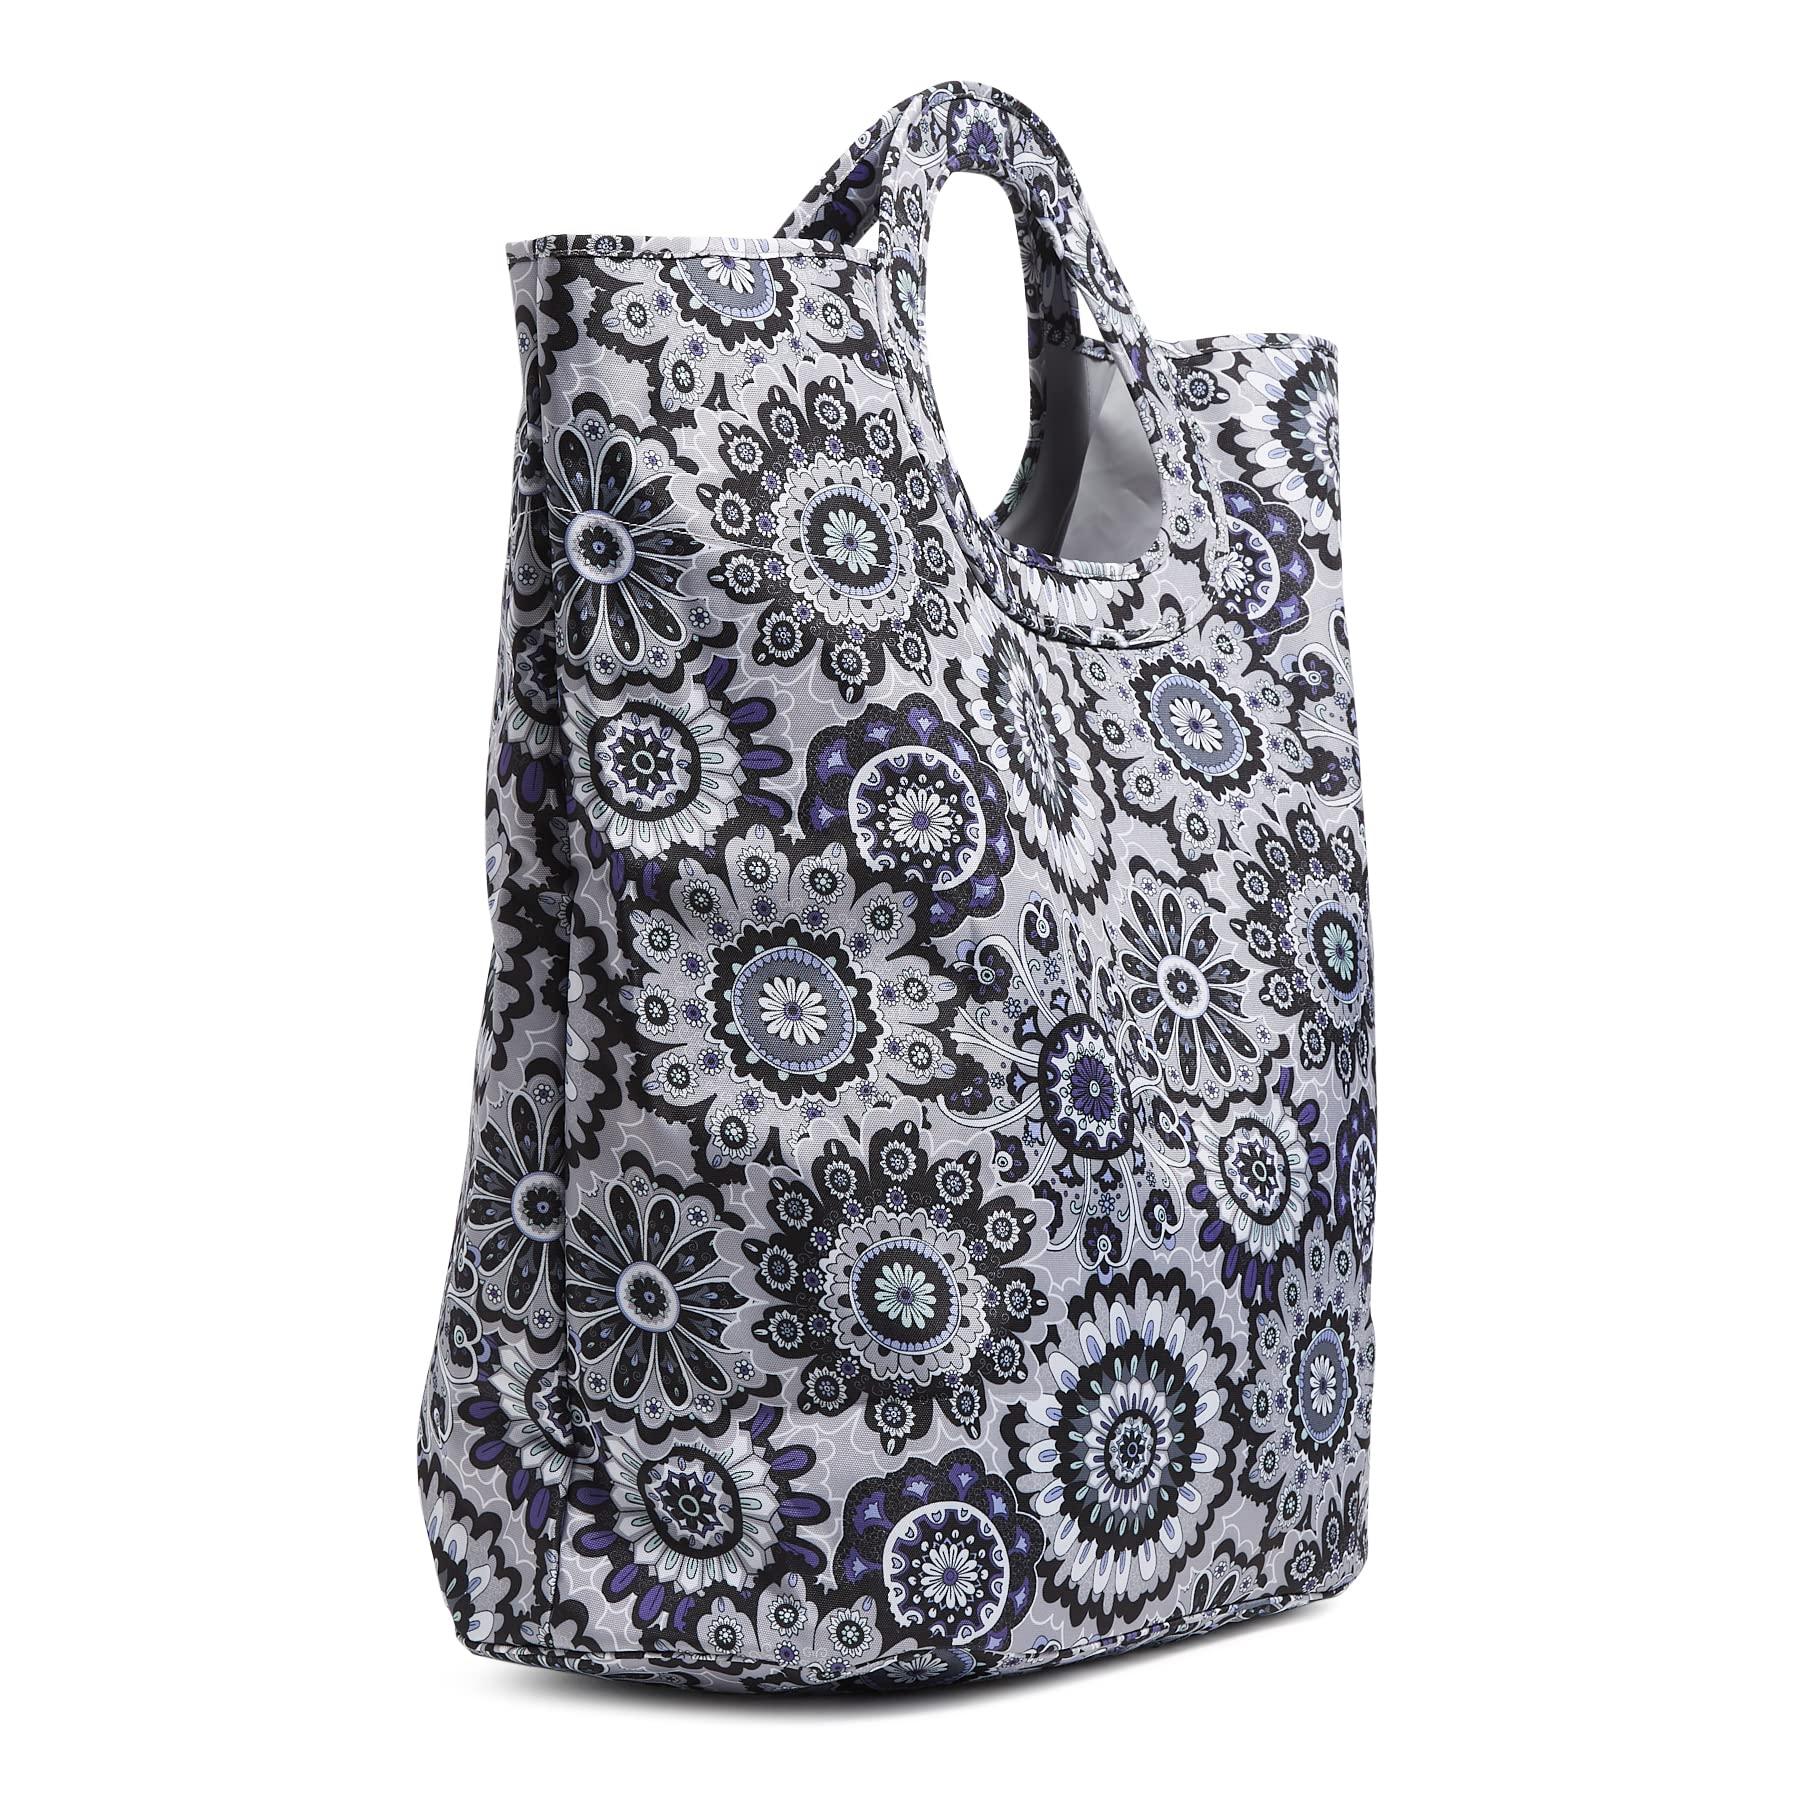 Vera Bradley Collapsible Laundry Hamper Tote in Blue